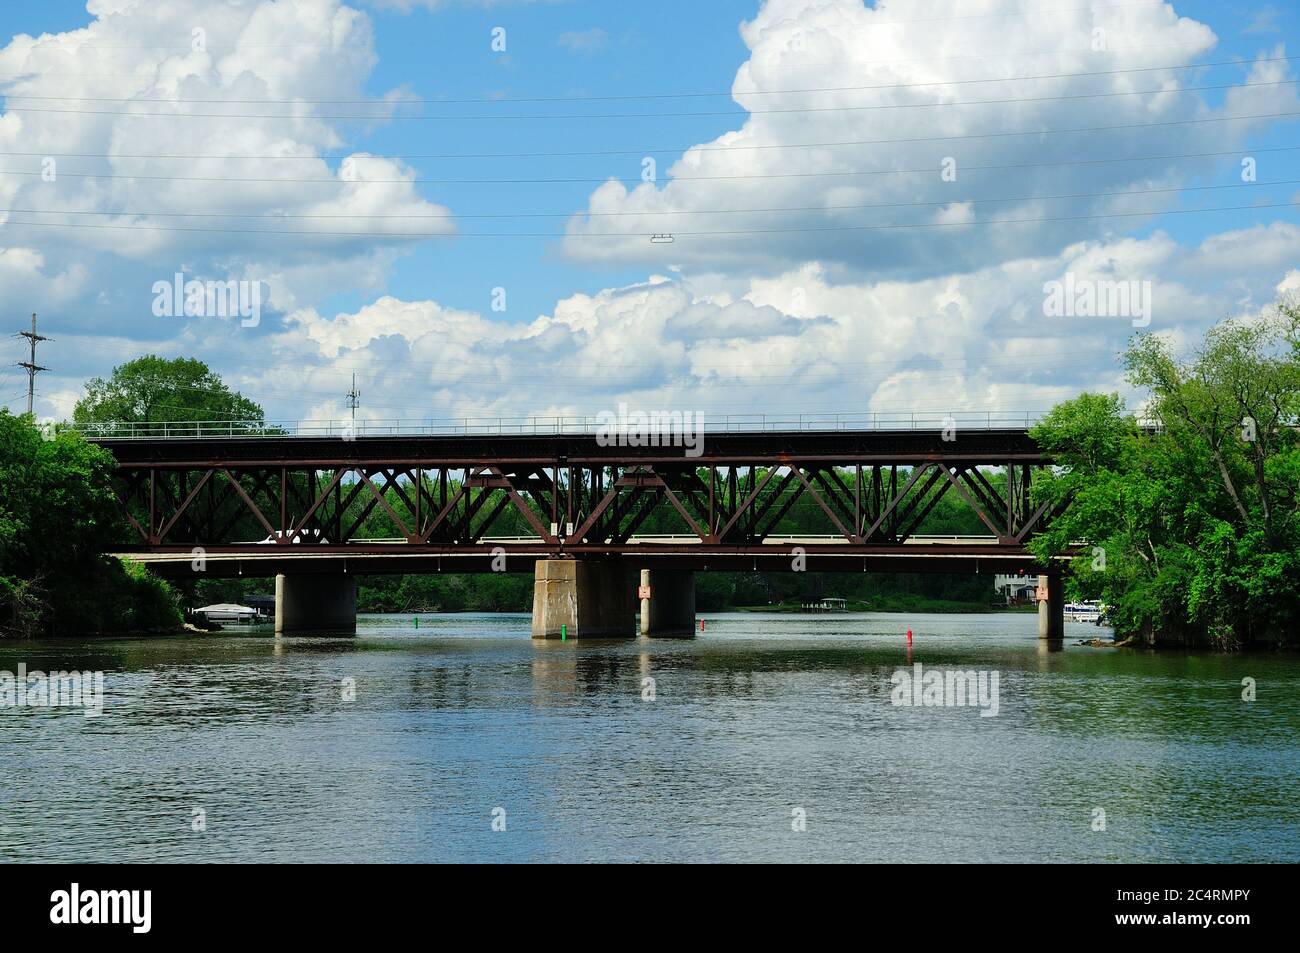 Highway 14 Bridge over the Fox River in Northern Illinois, USA. Stock Photo